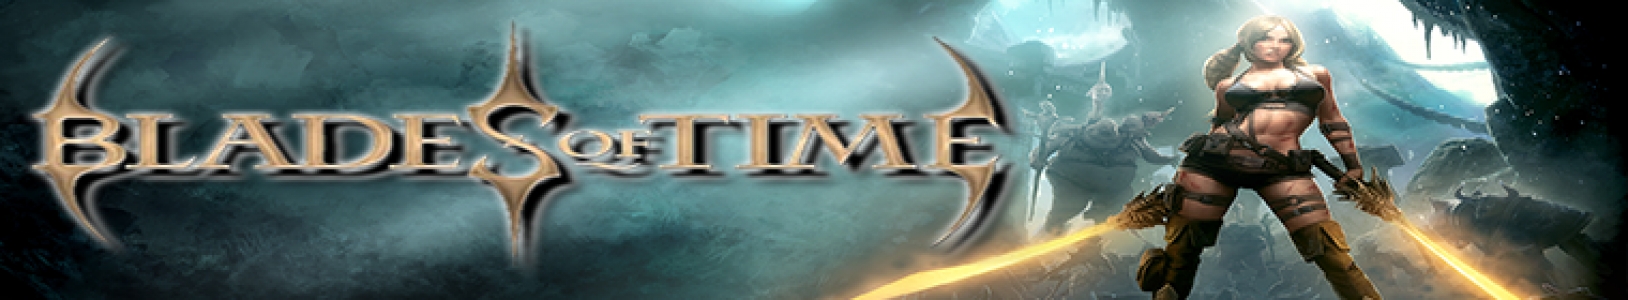 Blades of Time banner